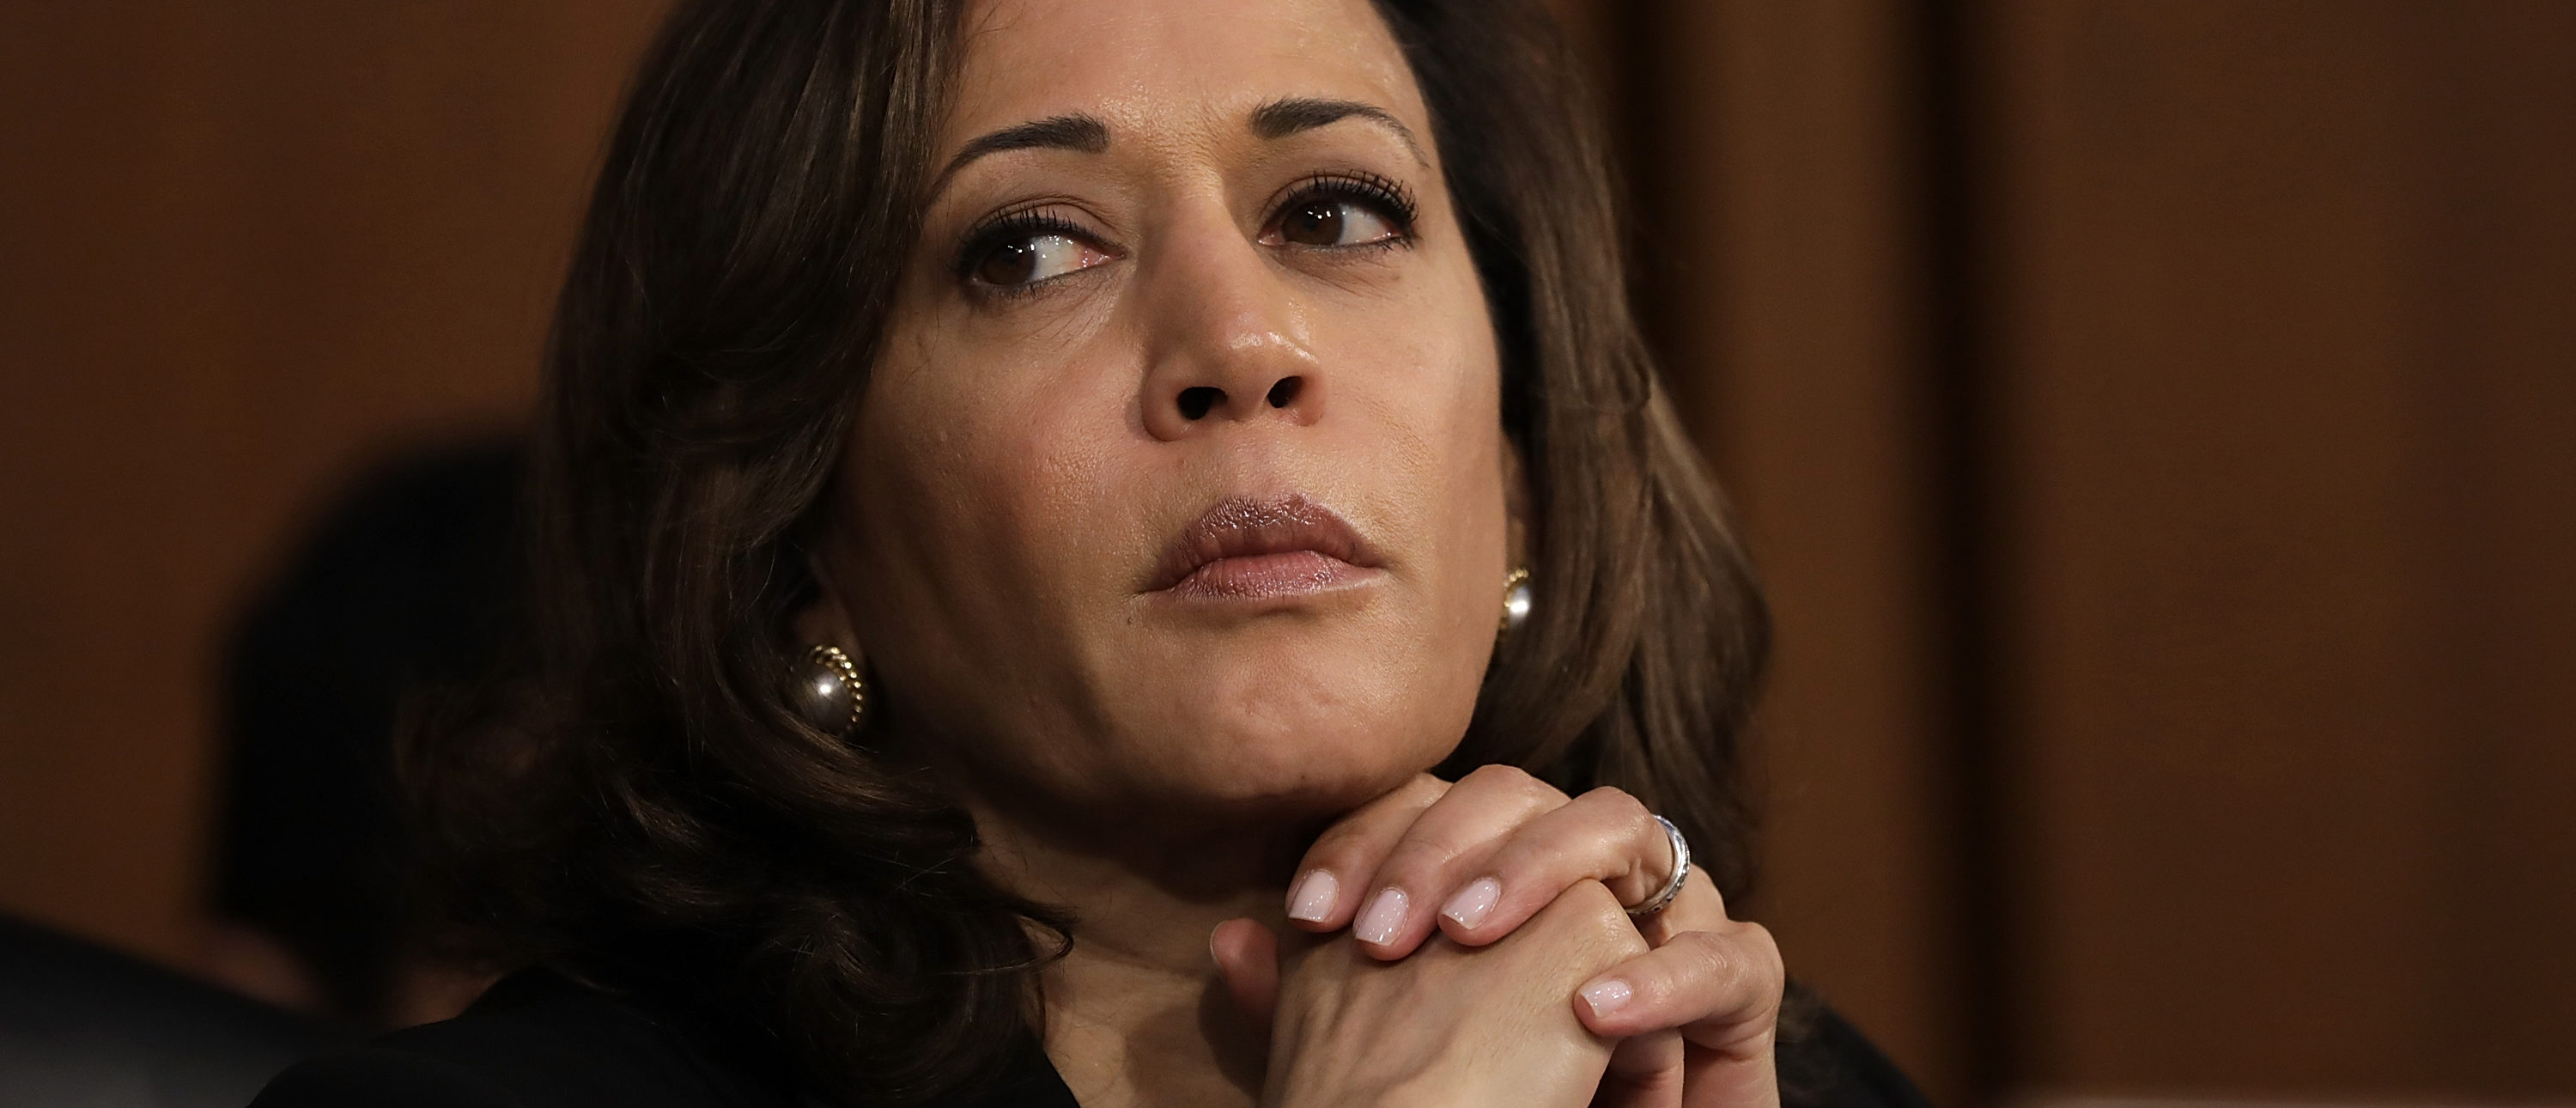 U.S. Sen. Kamala Harris (D-CA) delivers listens as Supreme Court nominee Judge Brett Kavanaugh appears for his confirmation hearing before the Senate Judiciary Committee in the Hart Senate Office Building on Capitol Hill September 4, 2018 in Washington, DC. Kavanaugh was nominated by President Donald Trump to fill the vacancy on the court left by retiring Associate Justice Anthony Kennedy. (Photo by Drew Angerer/Getty Images)